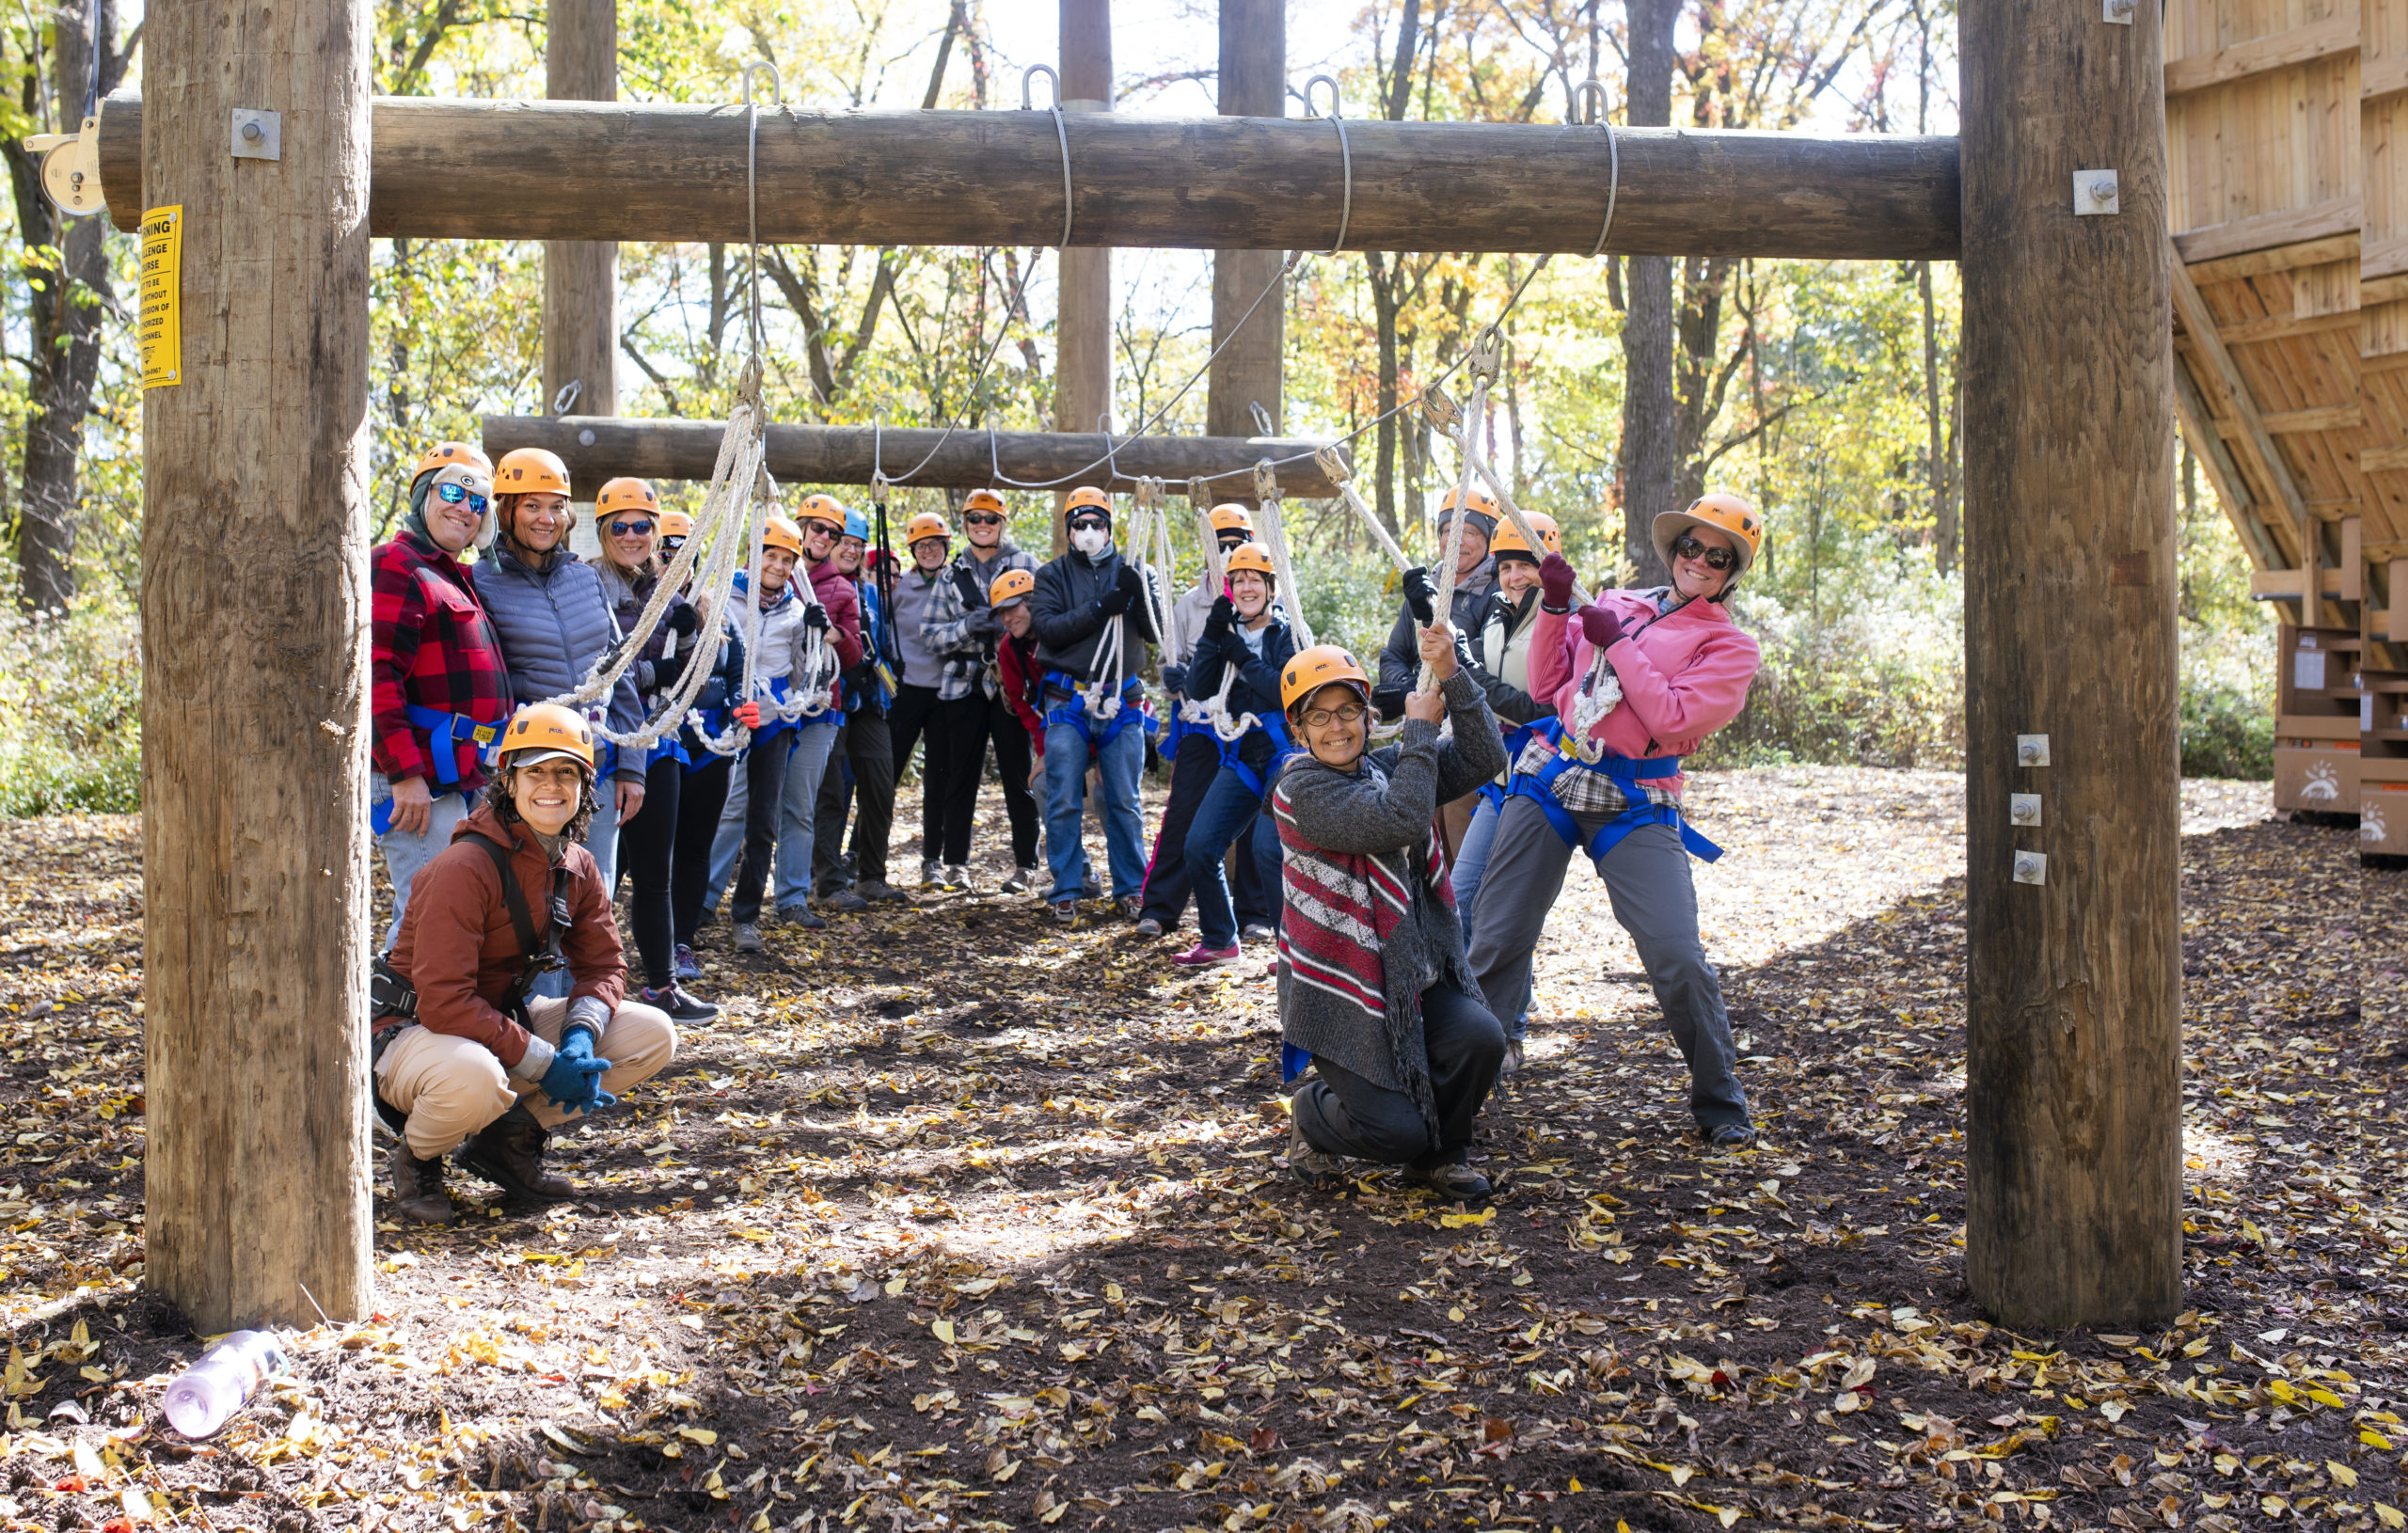 A group of people smile for the camera under a ropes course in the woods.